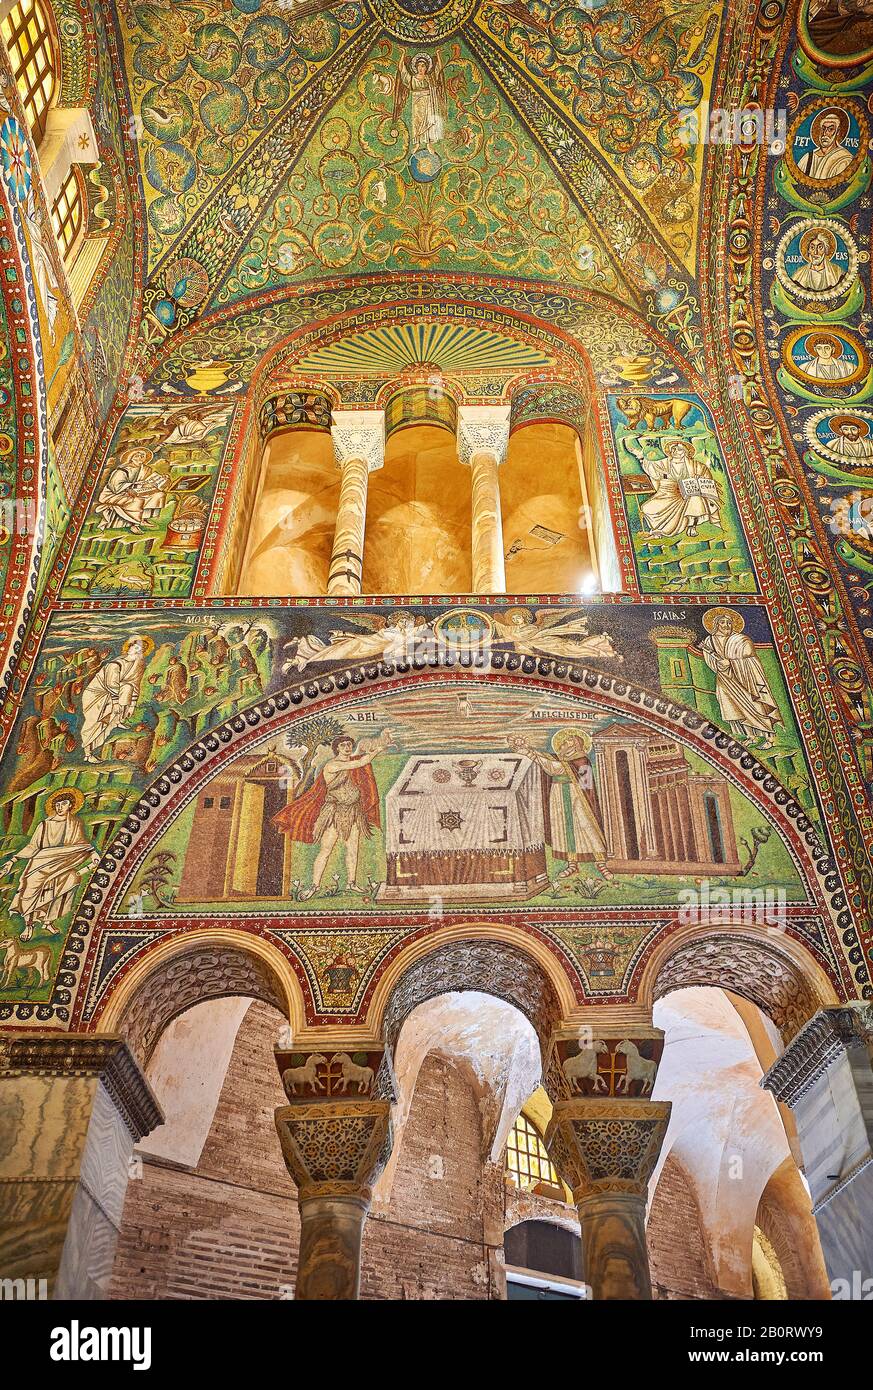 Mosaic depicting Abel making sacrifice. Byzantine Roman mosaics of the Basilica of San Vitale in Ravenna, Italy. Mosaic decoration paid for by Emperor Stock Photo